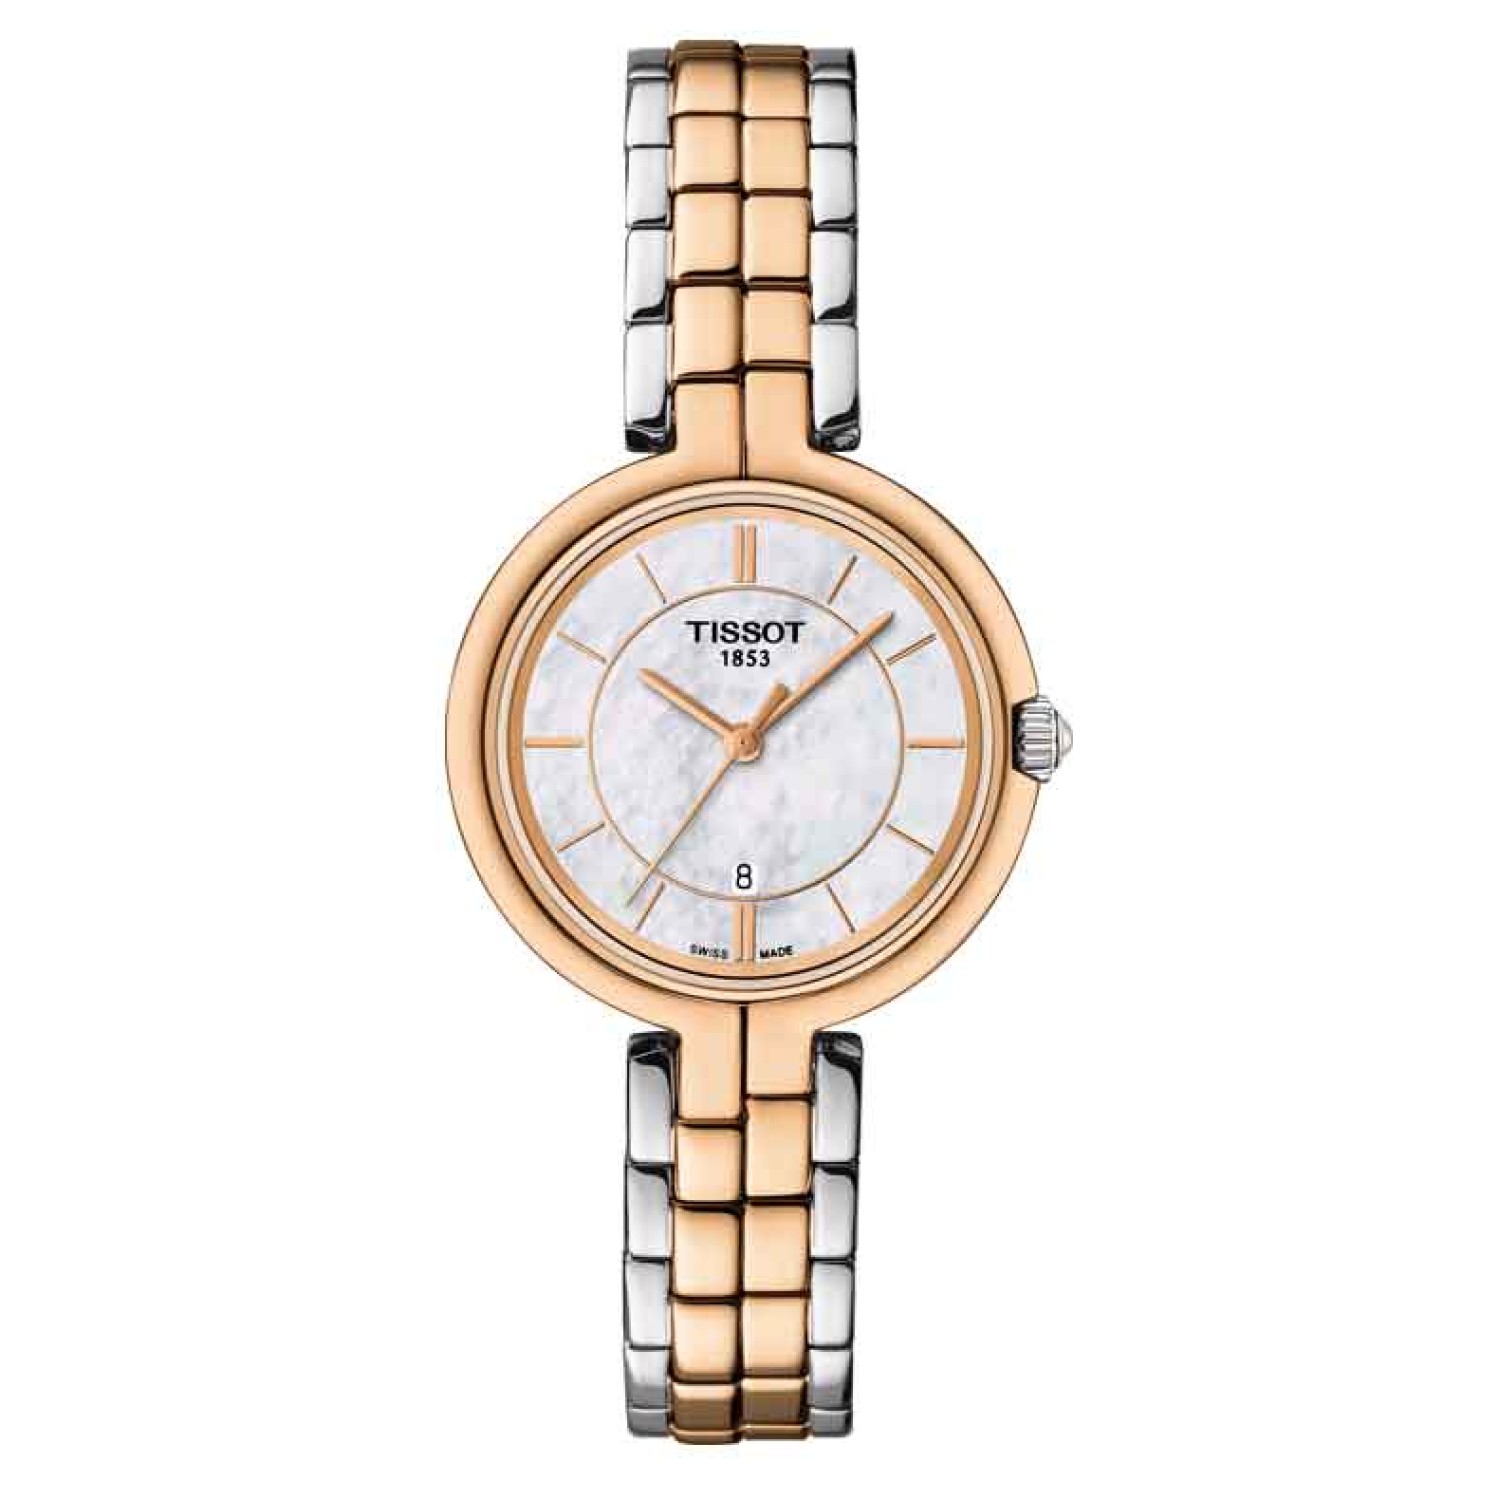 TISSOT Flamingo T-Lady T094.210.22.111.00. Embodying perfect simplicity, the clean lines of the Tissot Flamingo watch make it beautifully pure. It is unfussy and trendy without trying to be – sure to never go out of style, this elegant piece of jewellery 